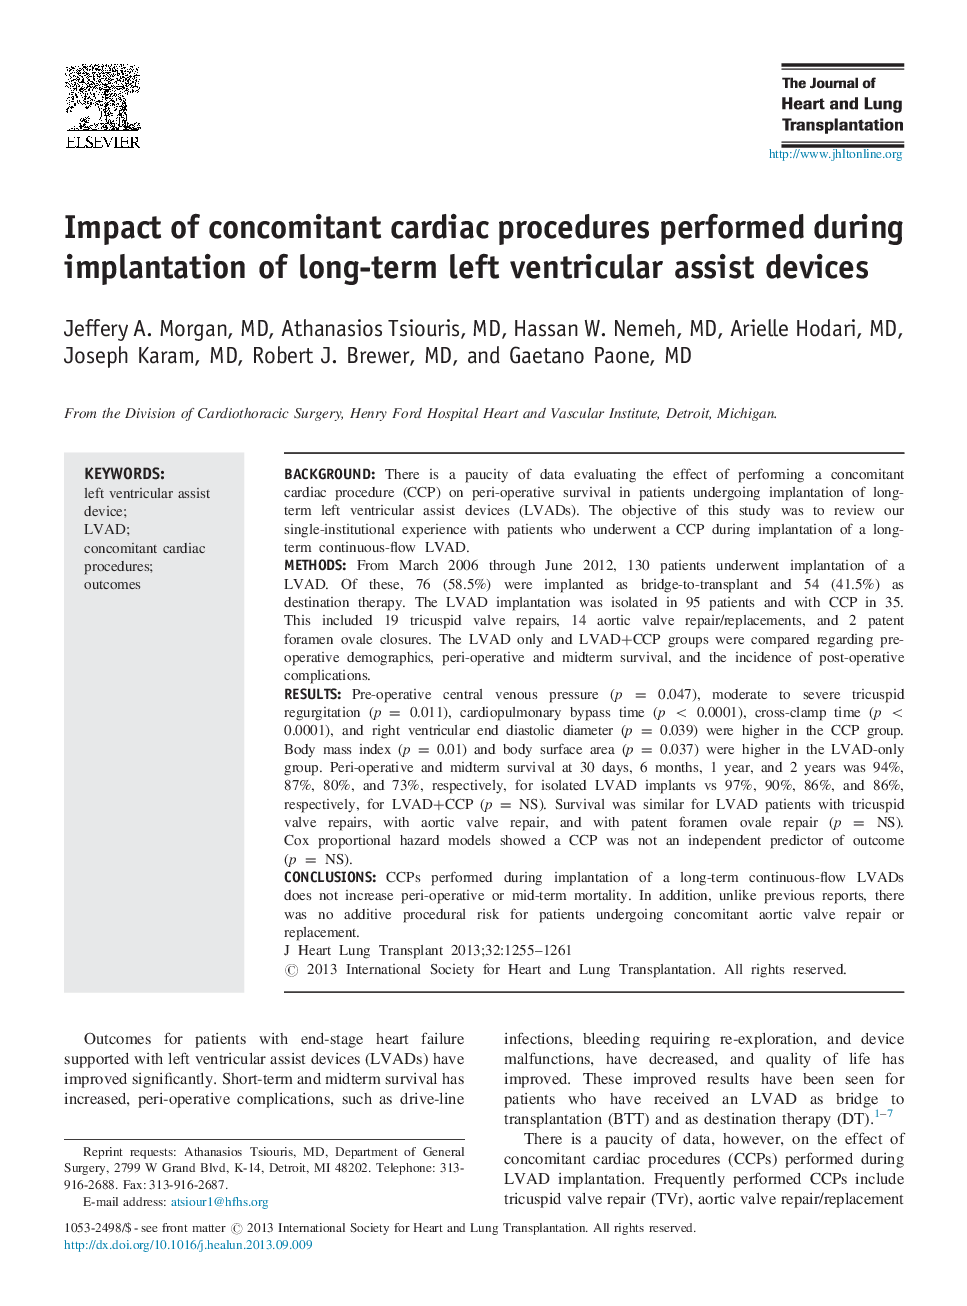 Impact of concomitant cardiac procedures performed during implantation of long-term left ventricular assist devices